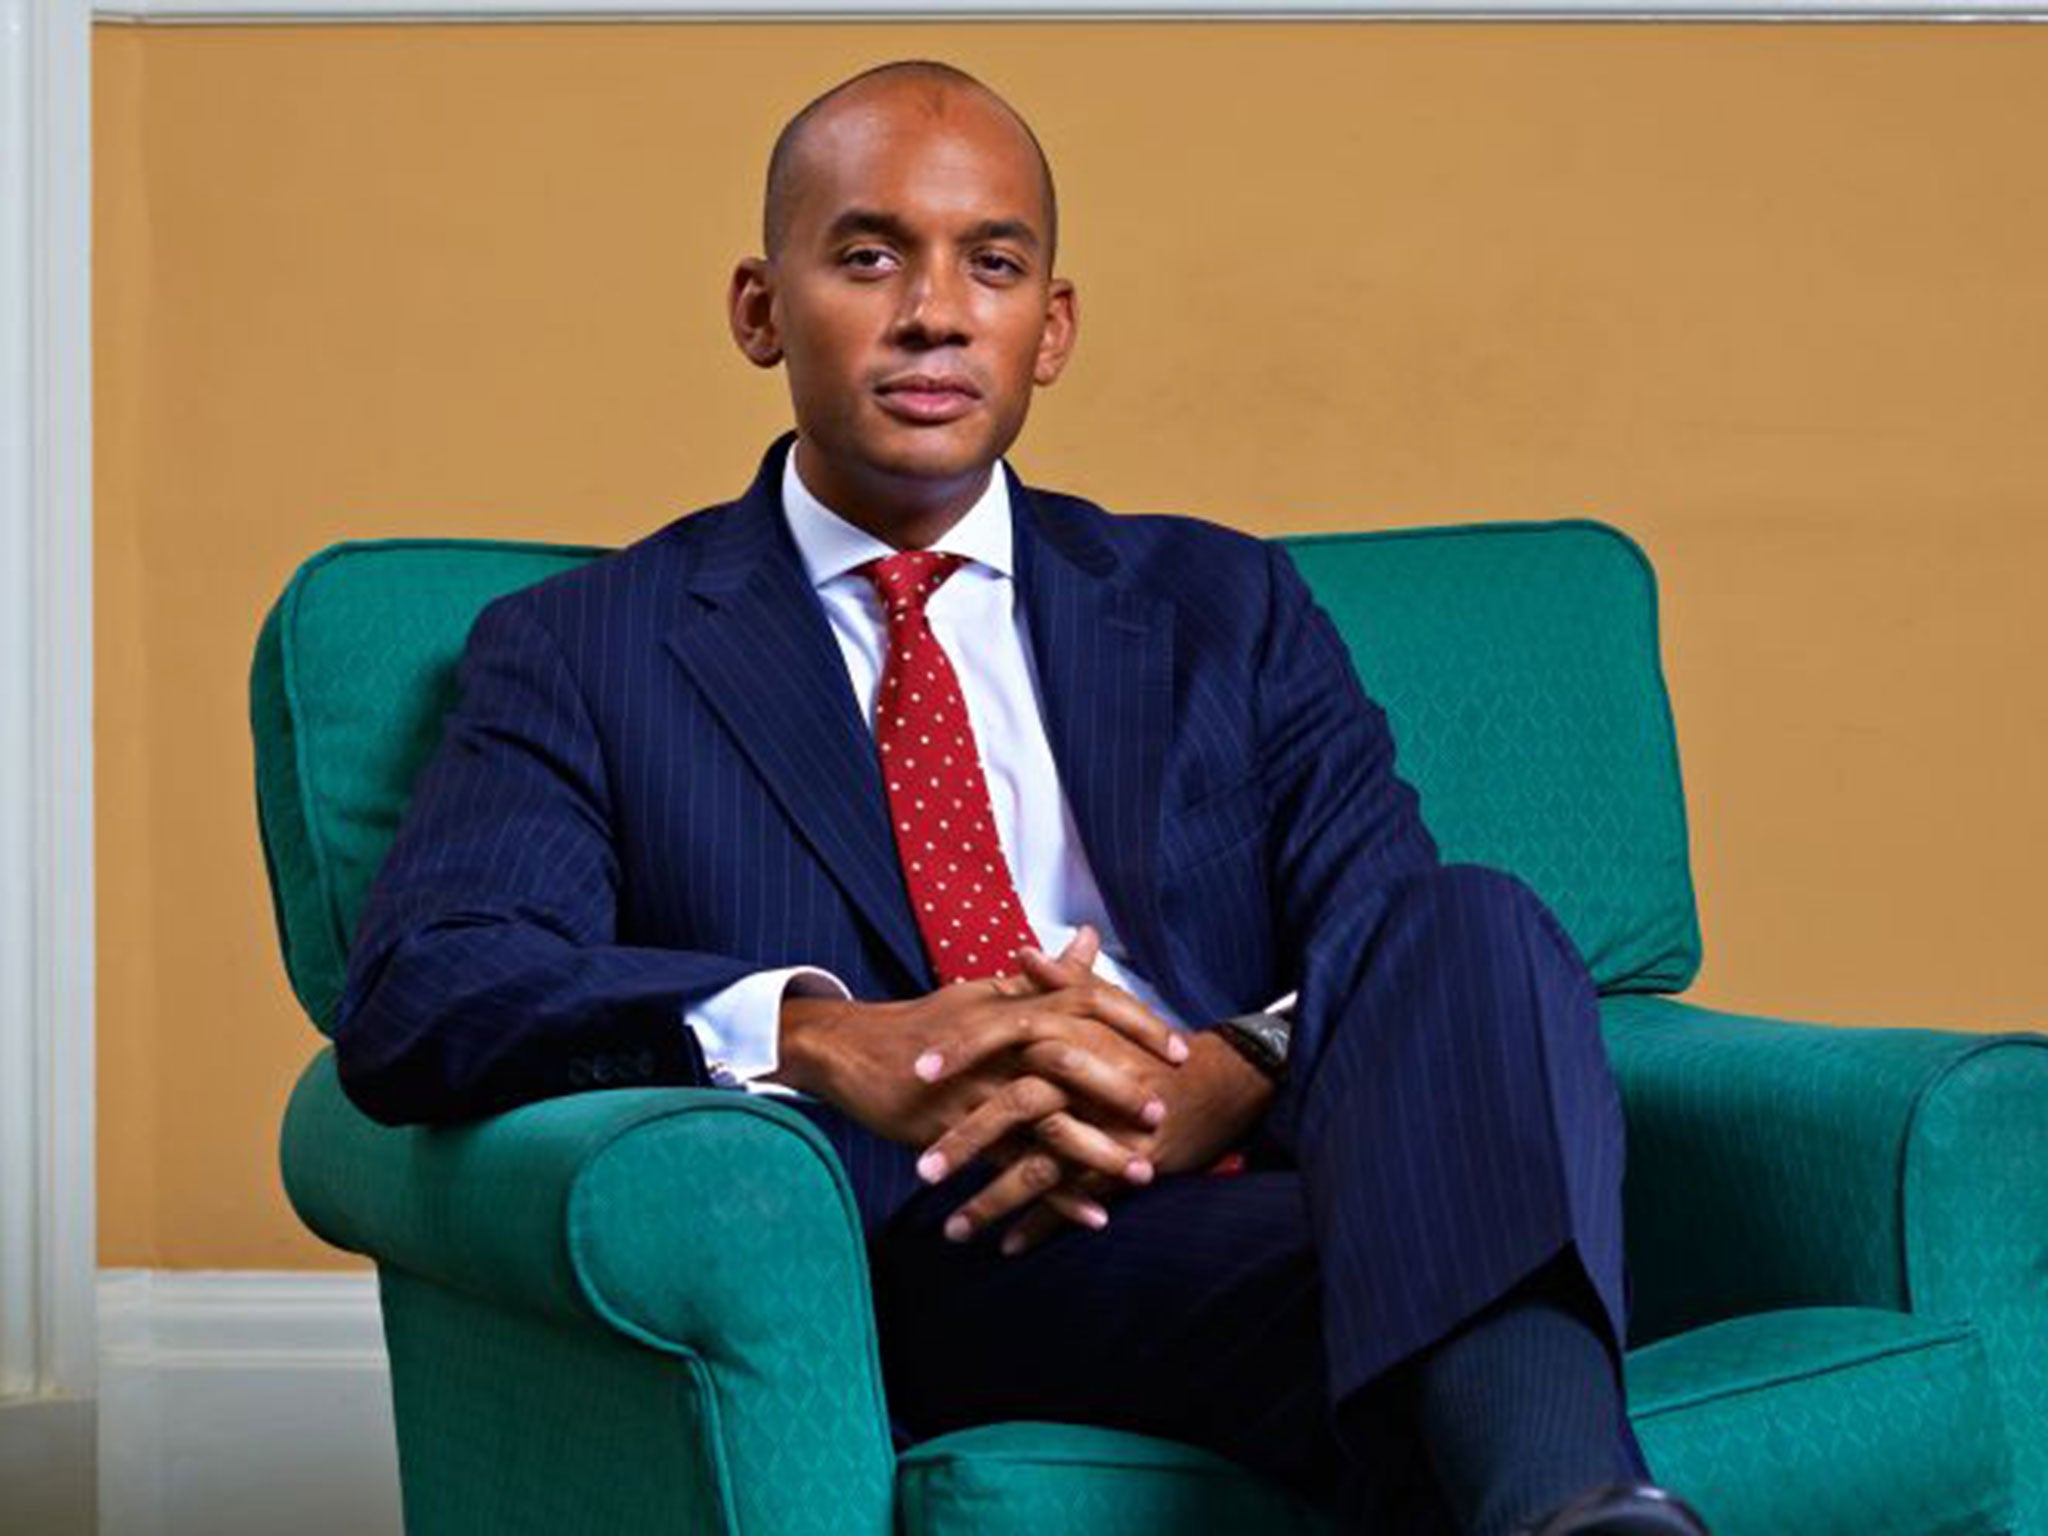 Chuka Umunna was elected MP for Streatham in 2010